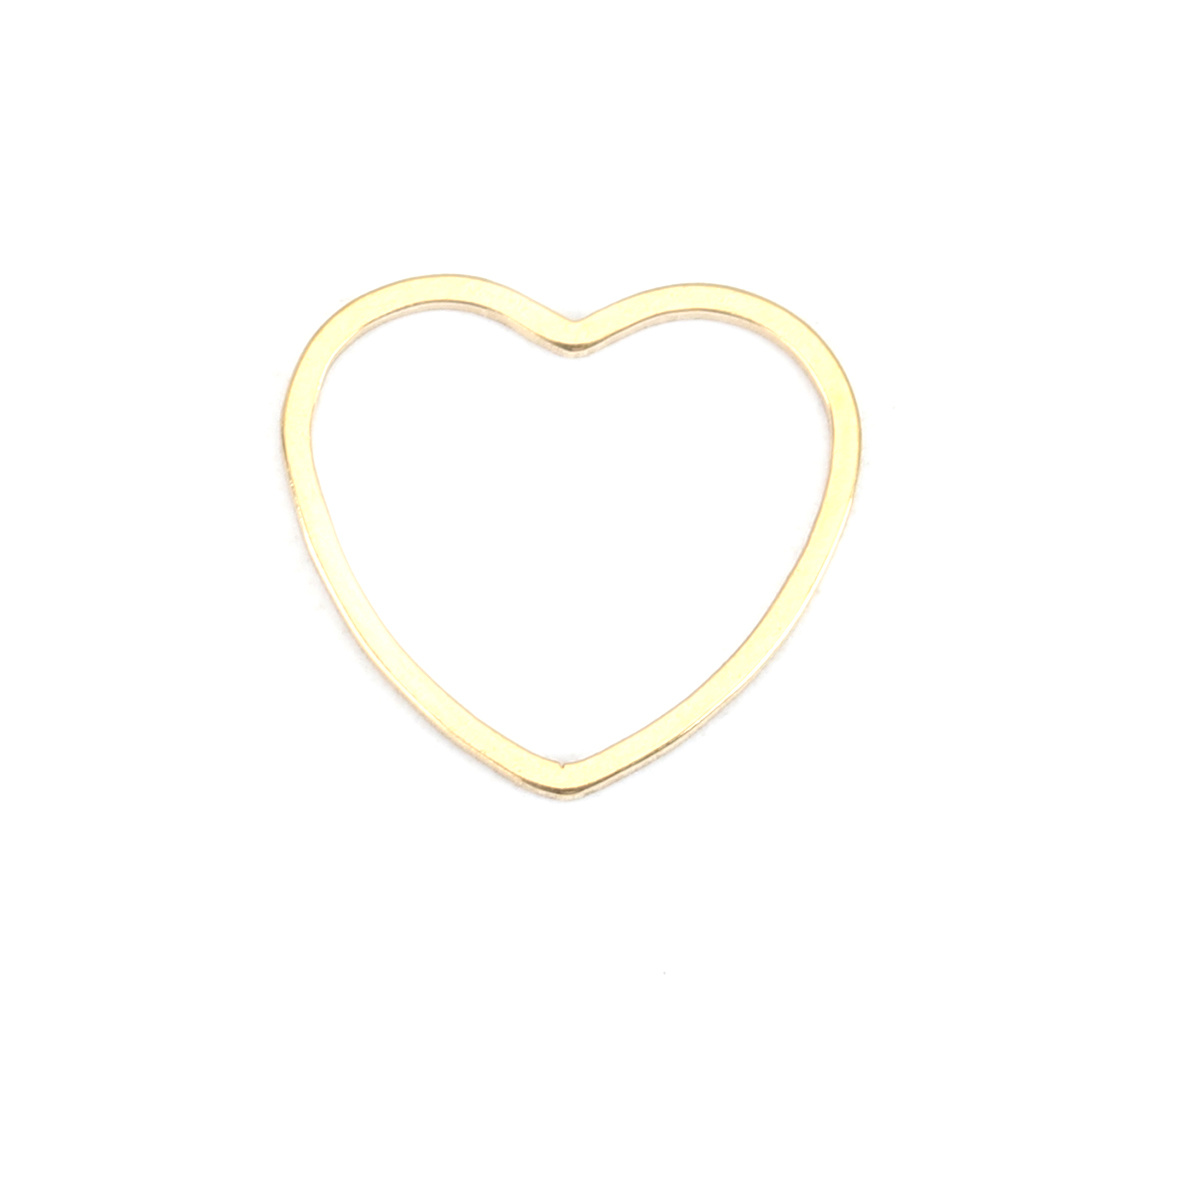 Stainless Steel Heart Connector 16x15mm Gold Plated - Beads & Basics